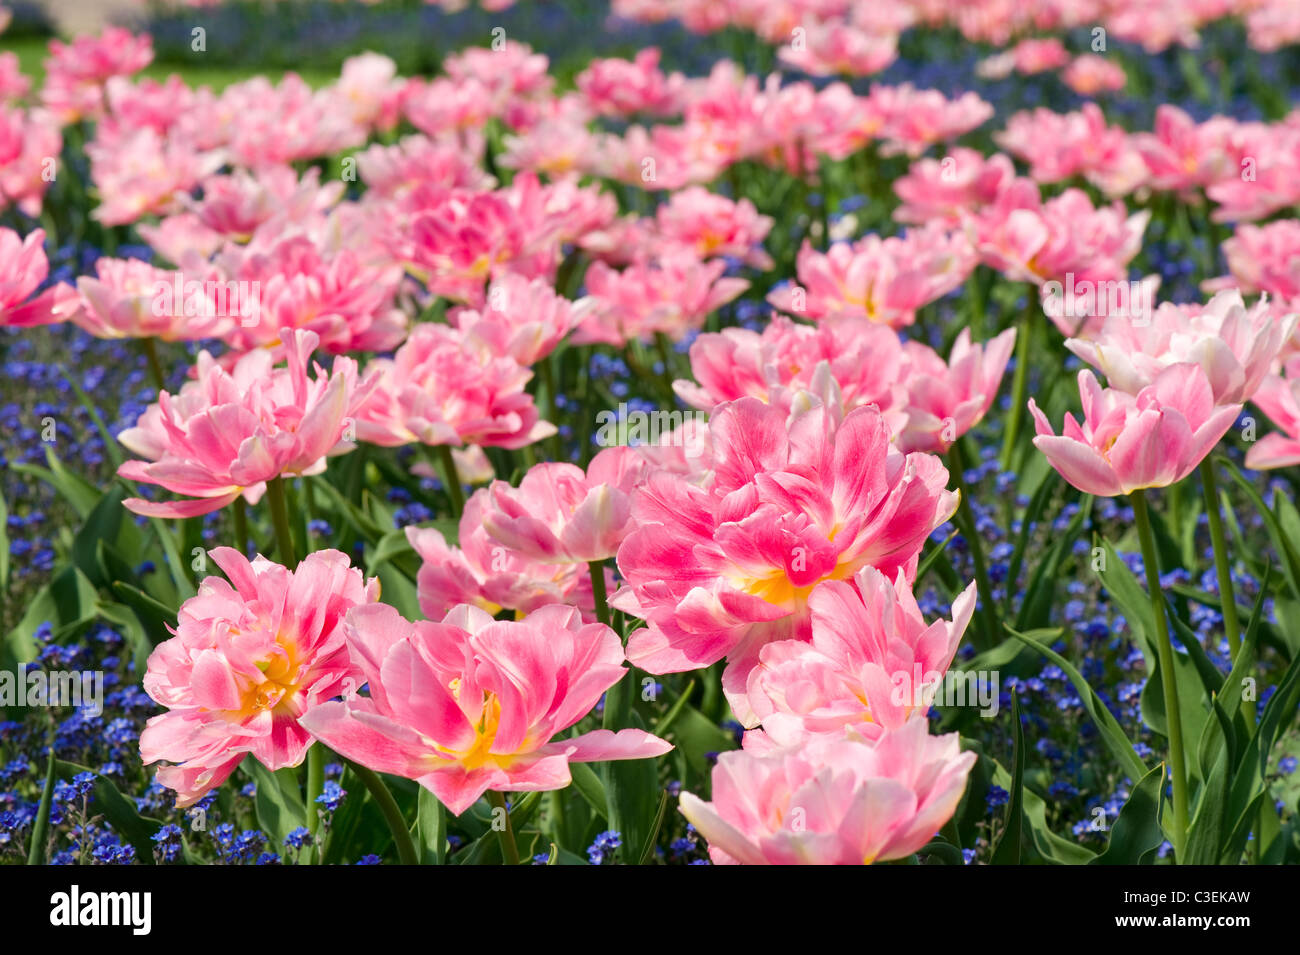 Blue forget-me-nots with pink tulips mix Stock Photo